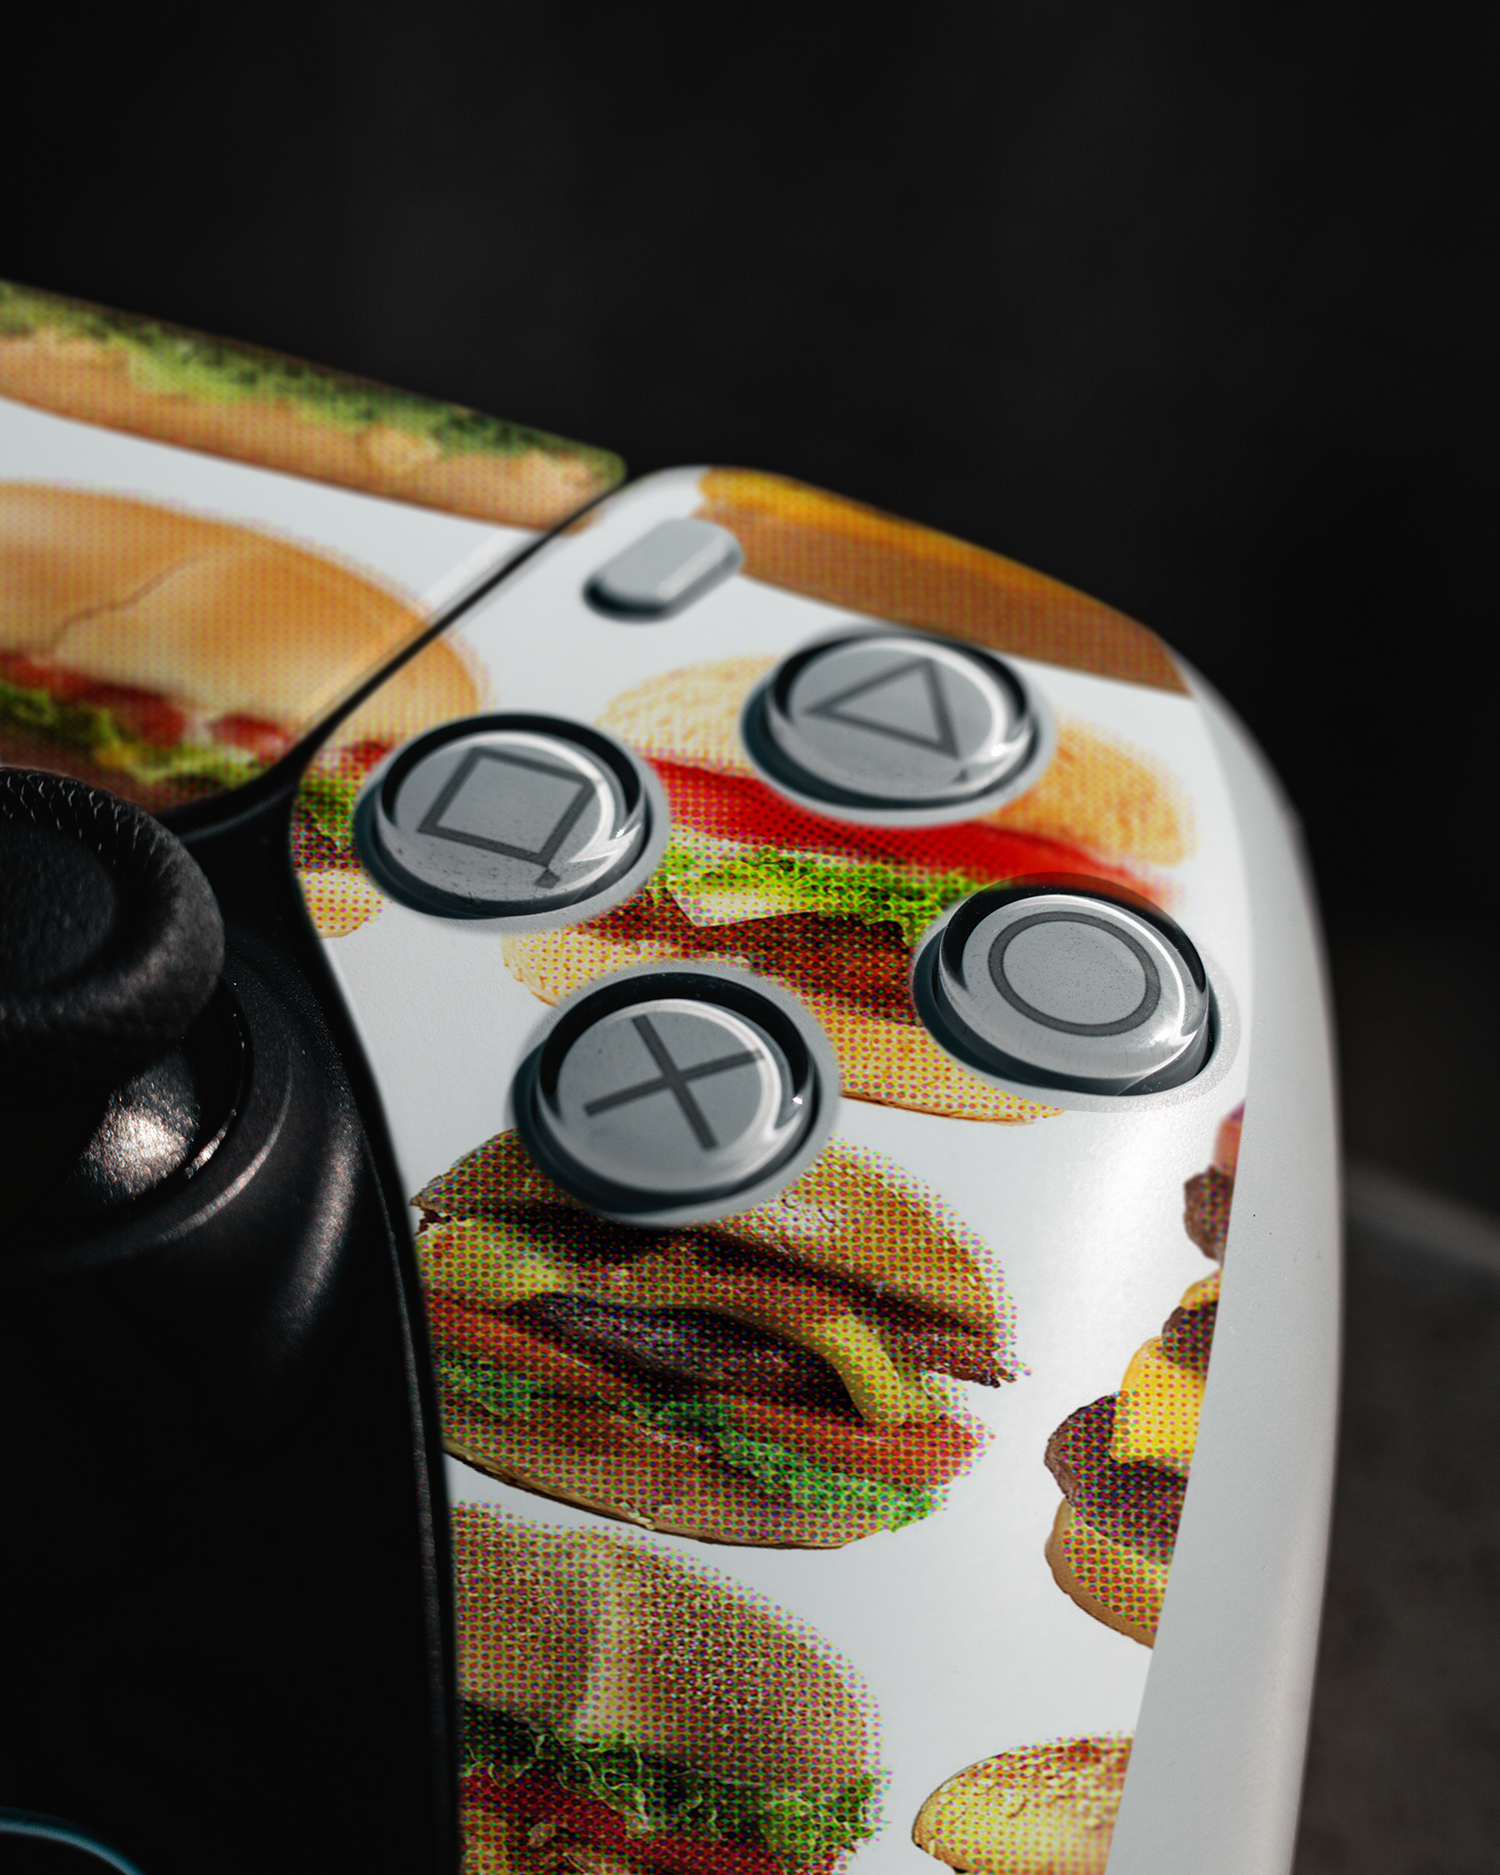 Burger Time Console Skin Sony PlayStation 5 DualSense Wireless Controller: Detail shot